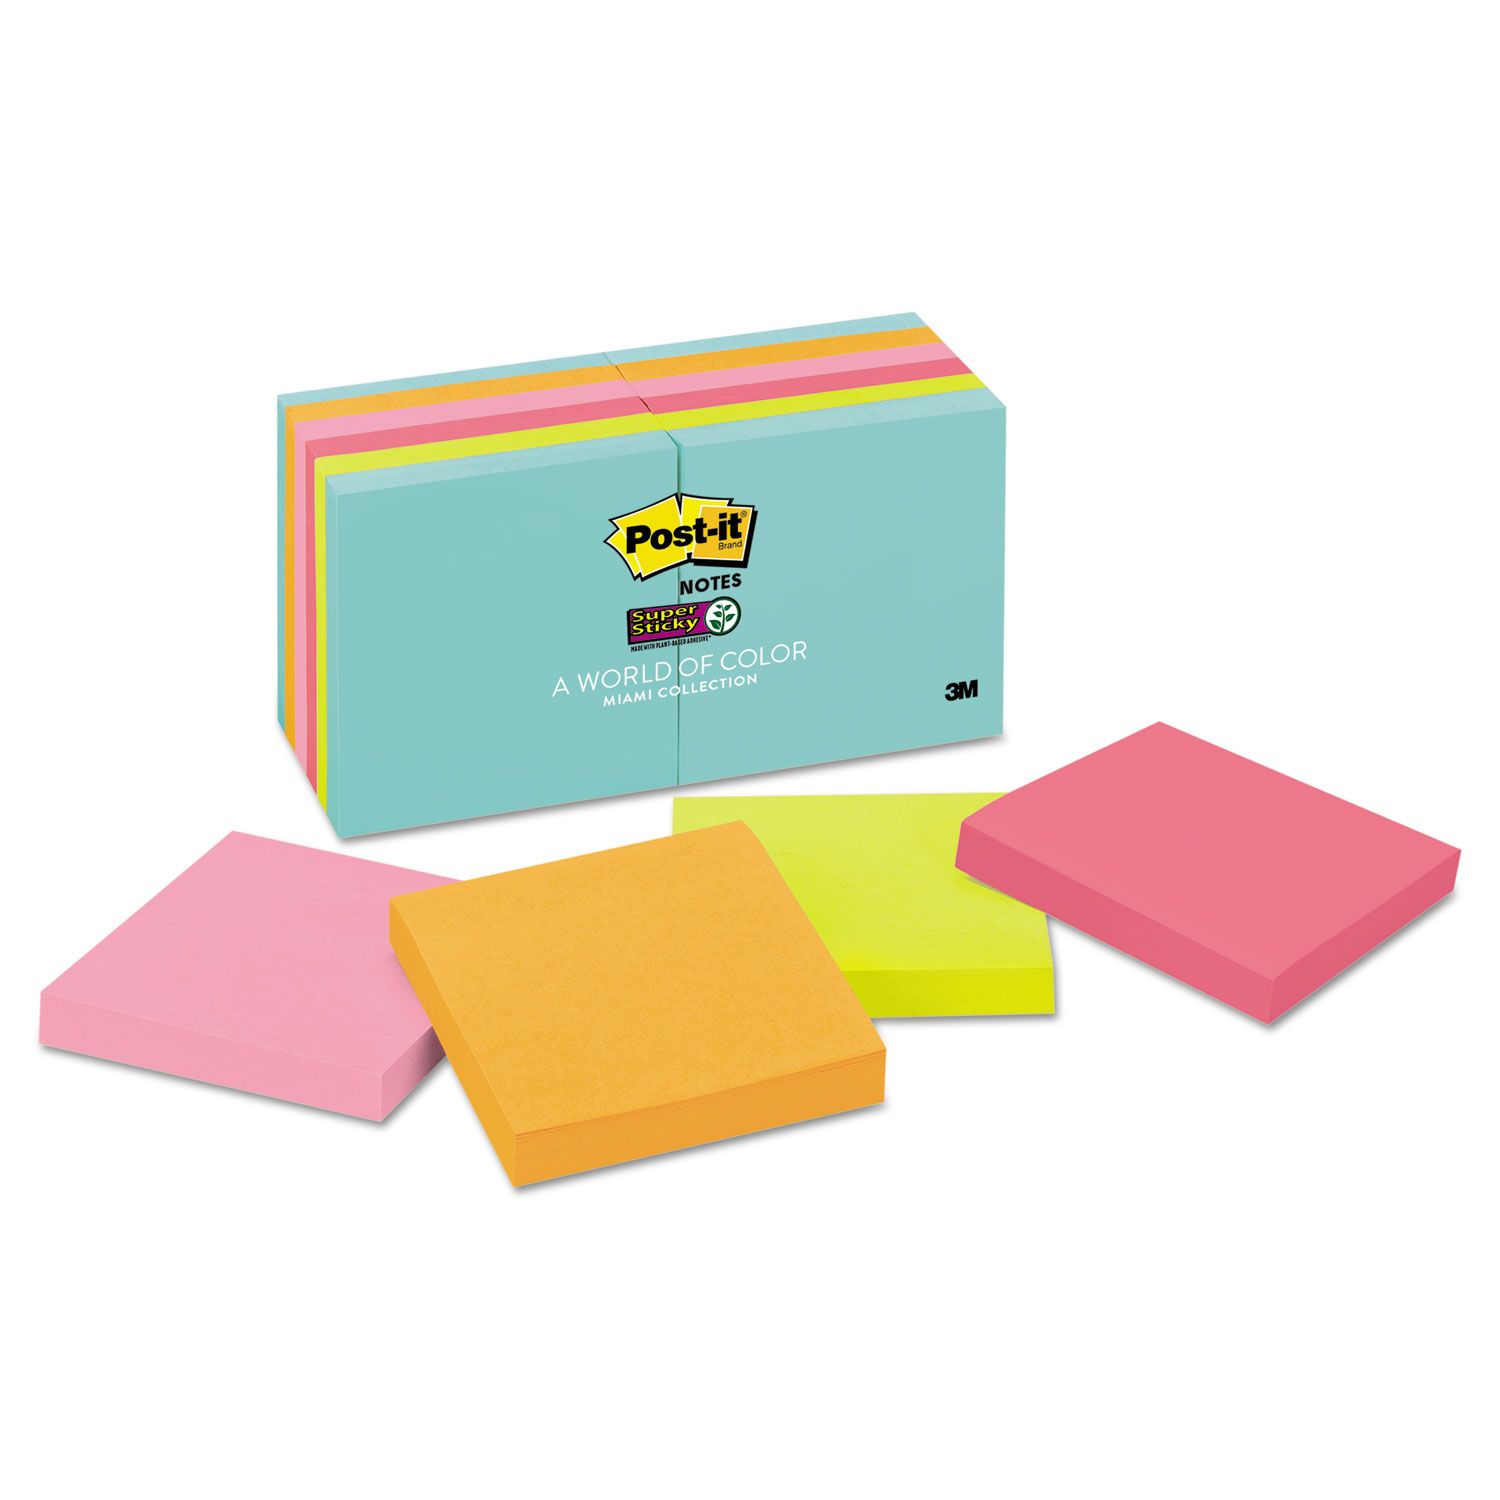  Post-it Notes Super Sticky 654-12SSMIA Pads in Miami Colors, 3 x 3, 90/Pad, 12 Pads/Pack (MMM65412SSMIA) 